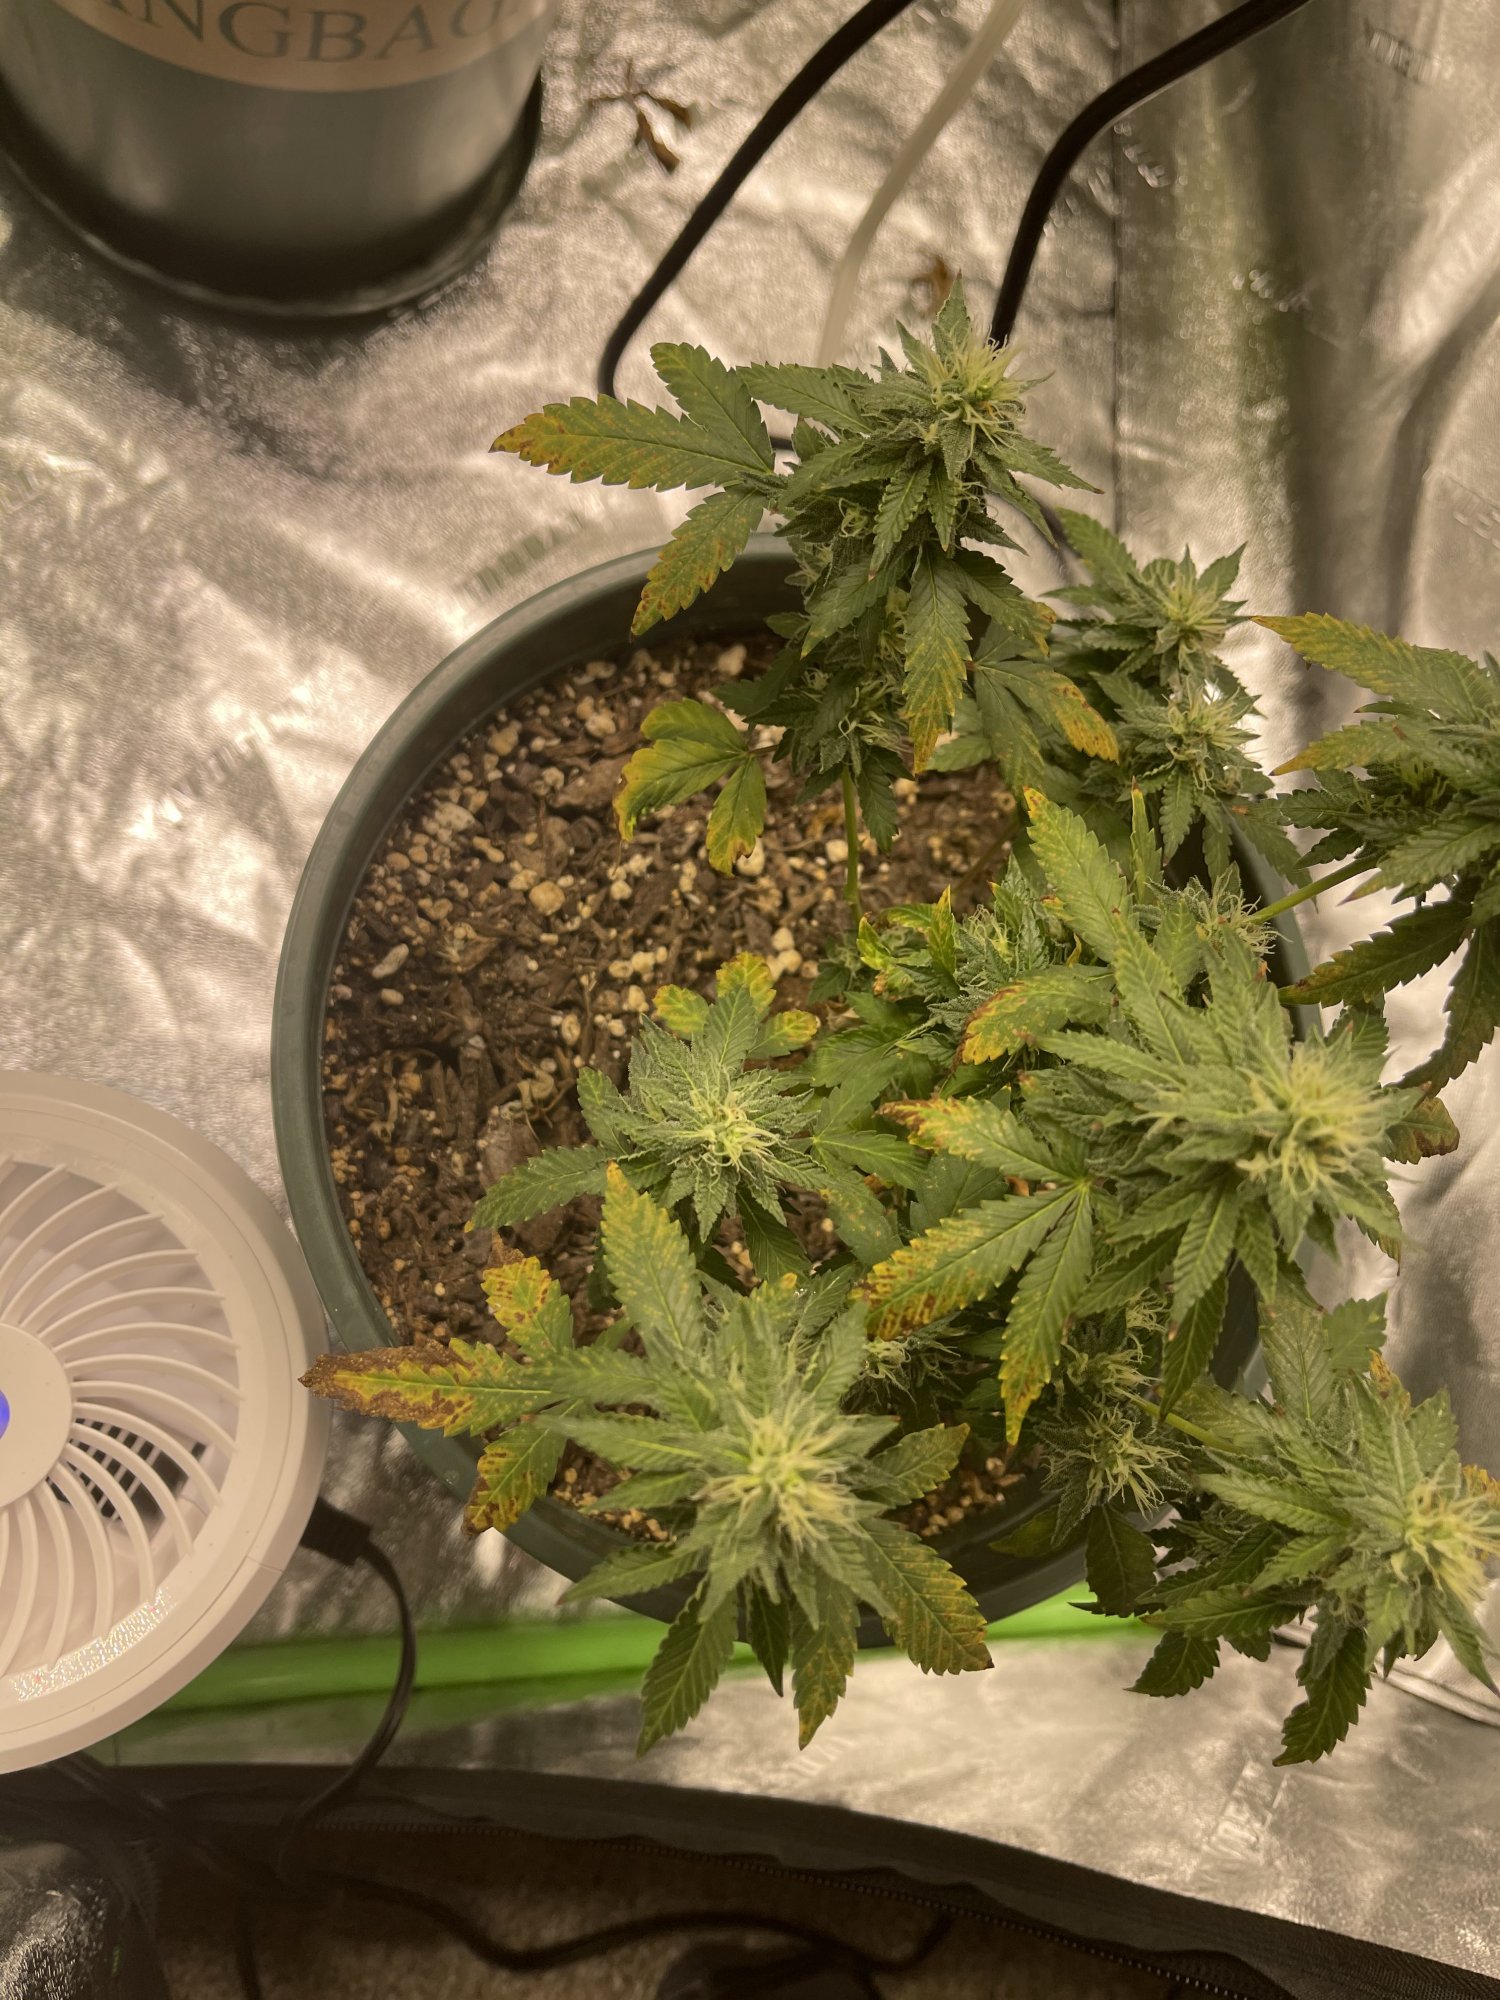 Problem with plants during flowering